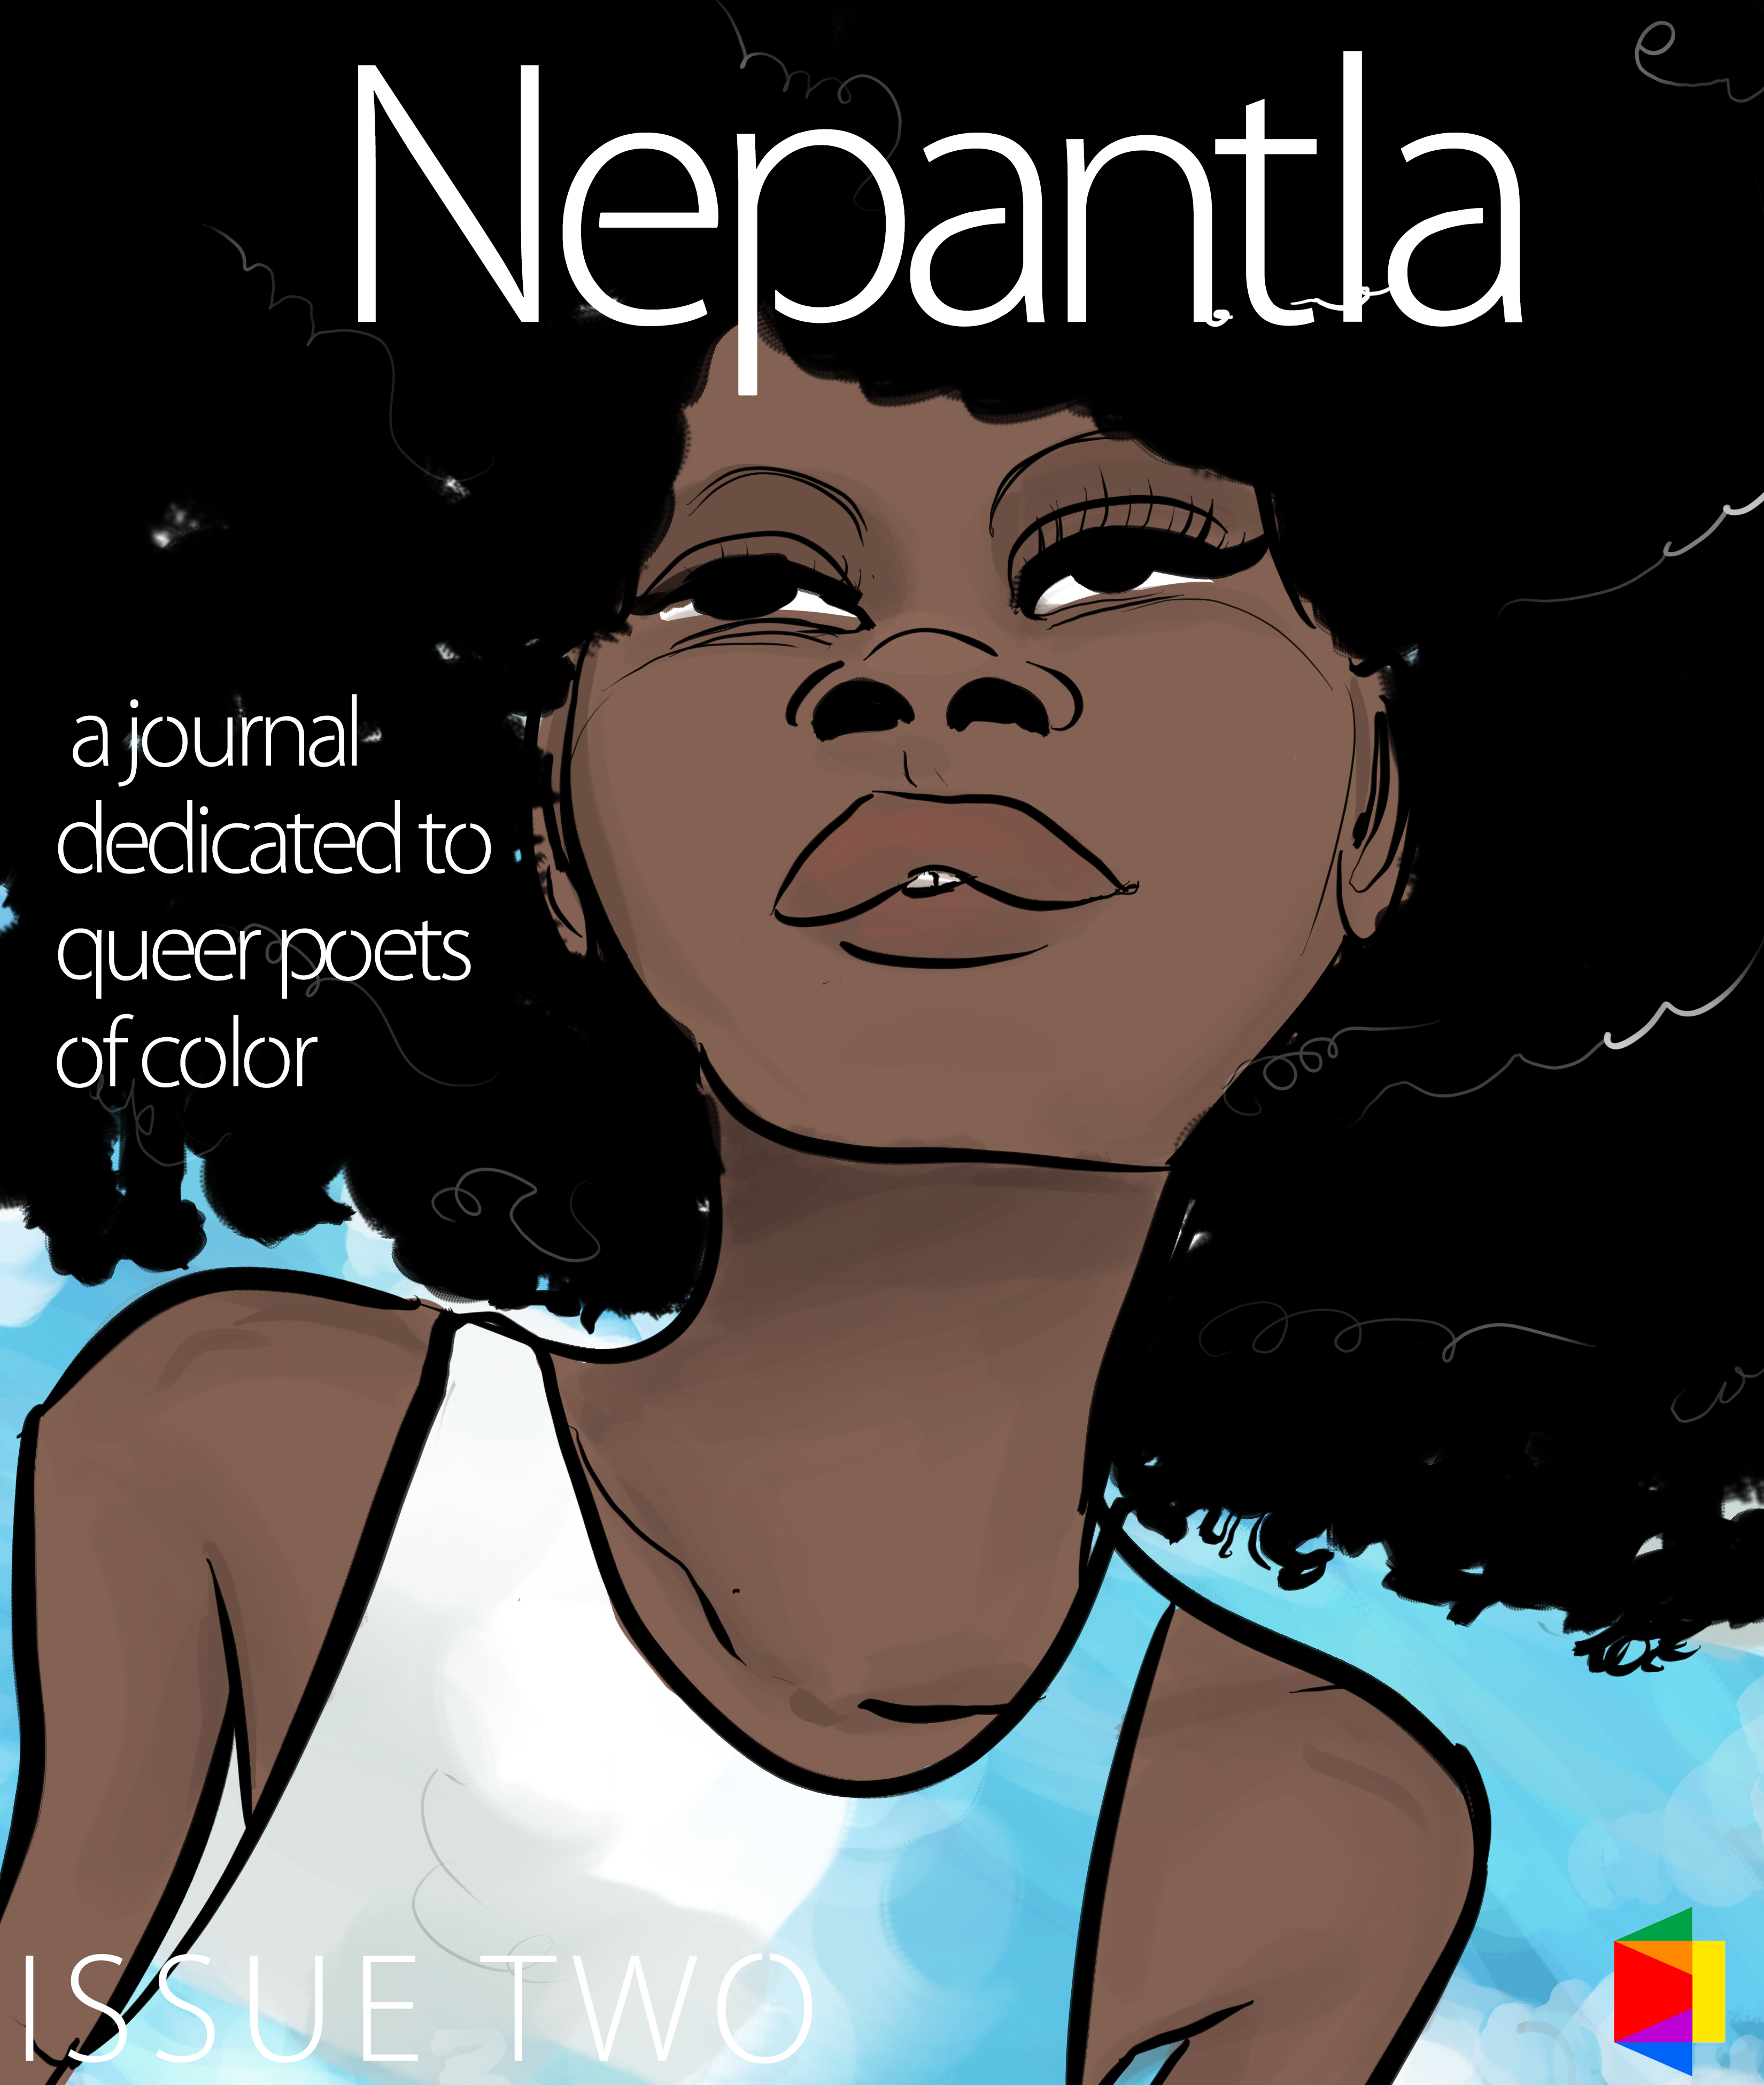 http:// https://lambdaliterary.org/2015/09/read-now-the-second-issue-of-nepantla-a-journal-dedicated-to-queer-poets-of-color/